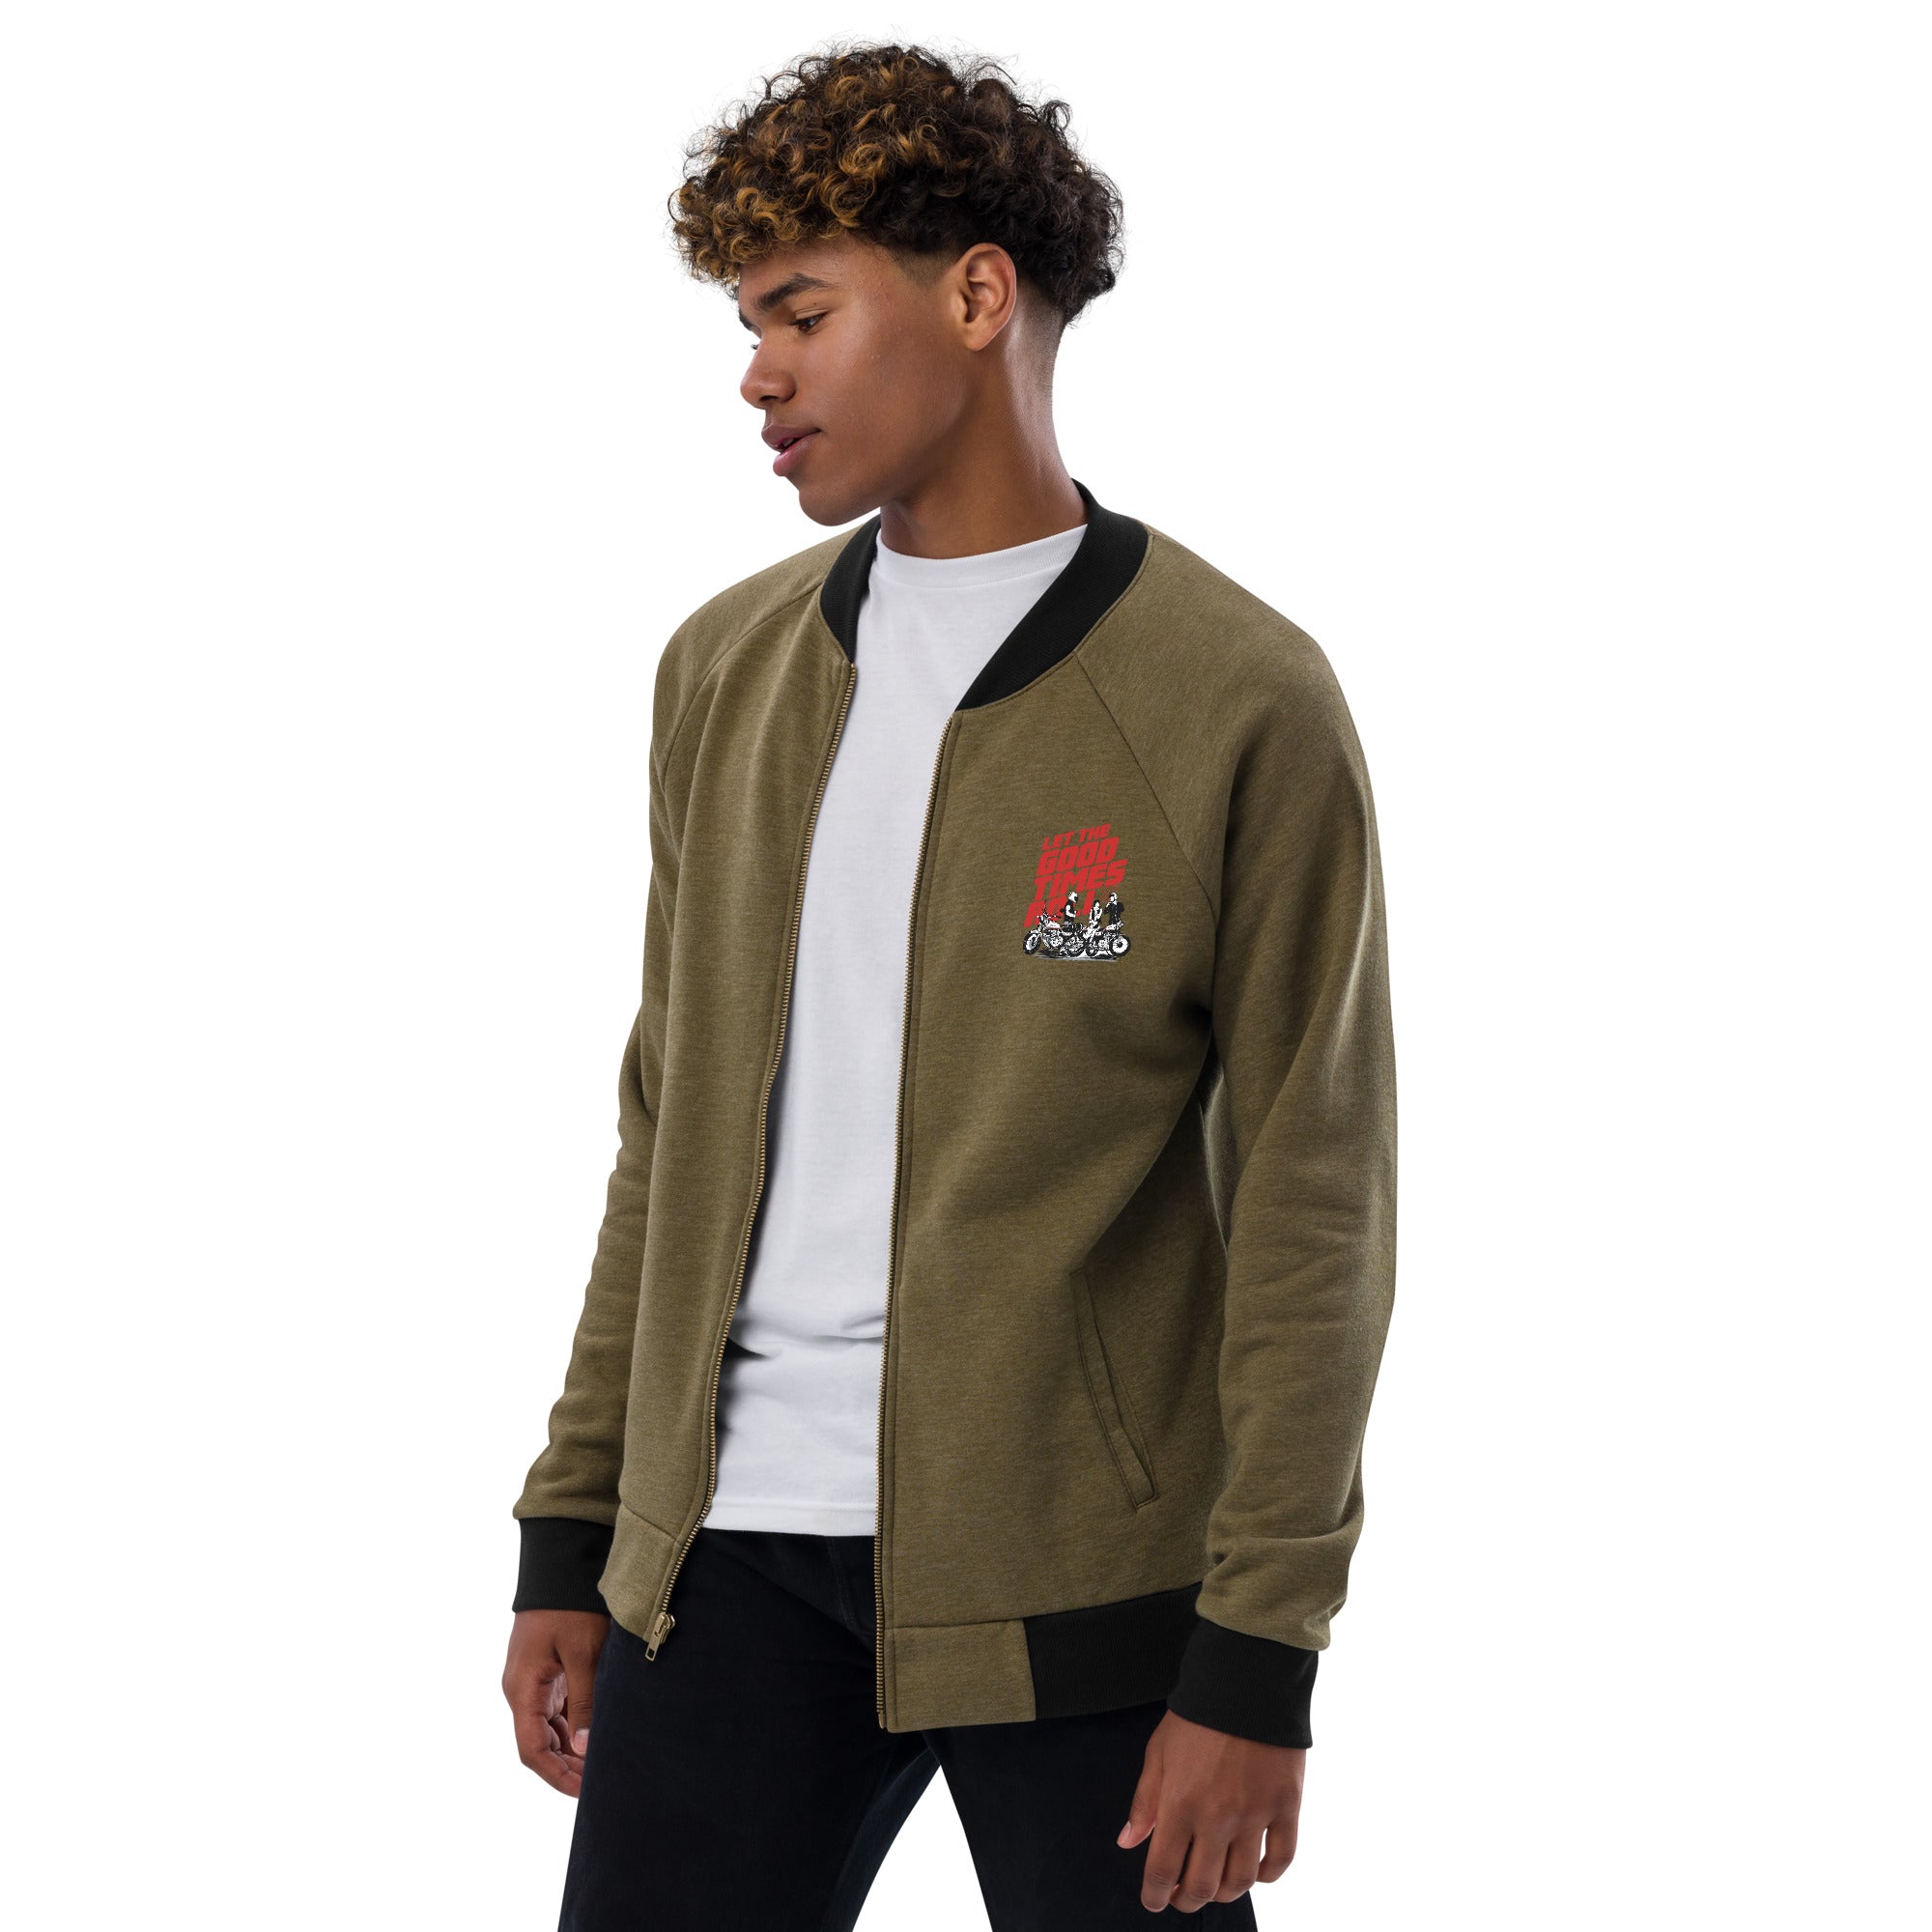 Let the Good Times Roll Bomber Jacket